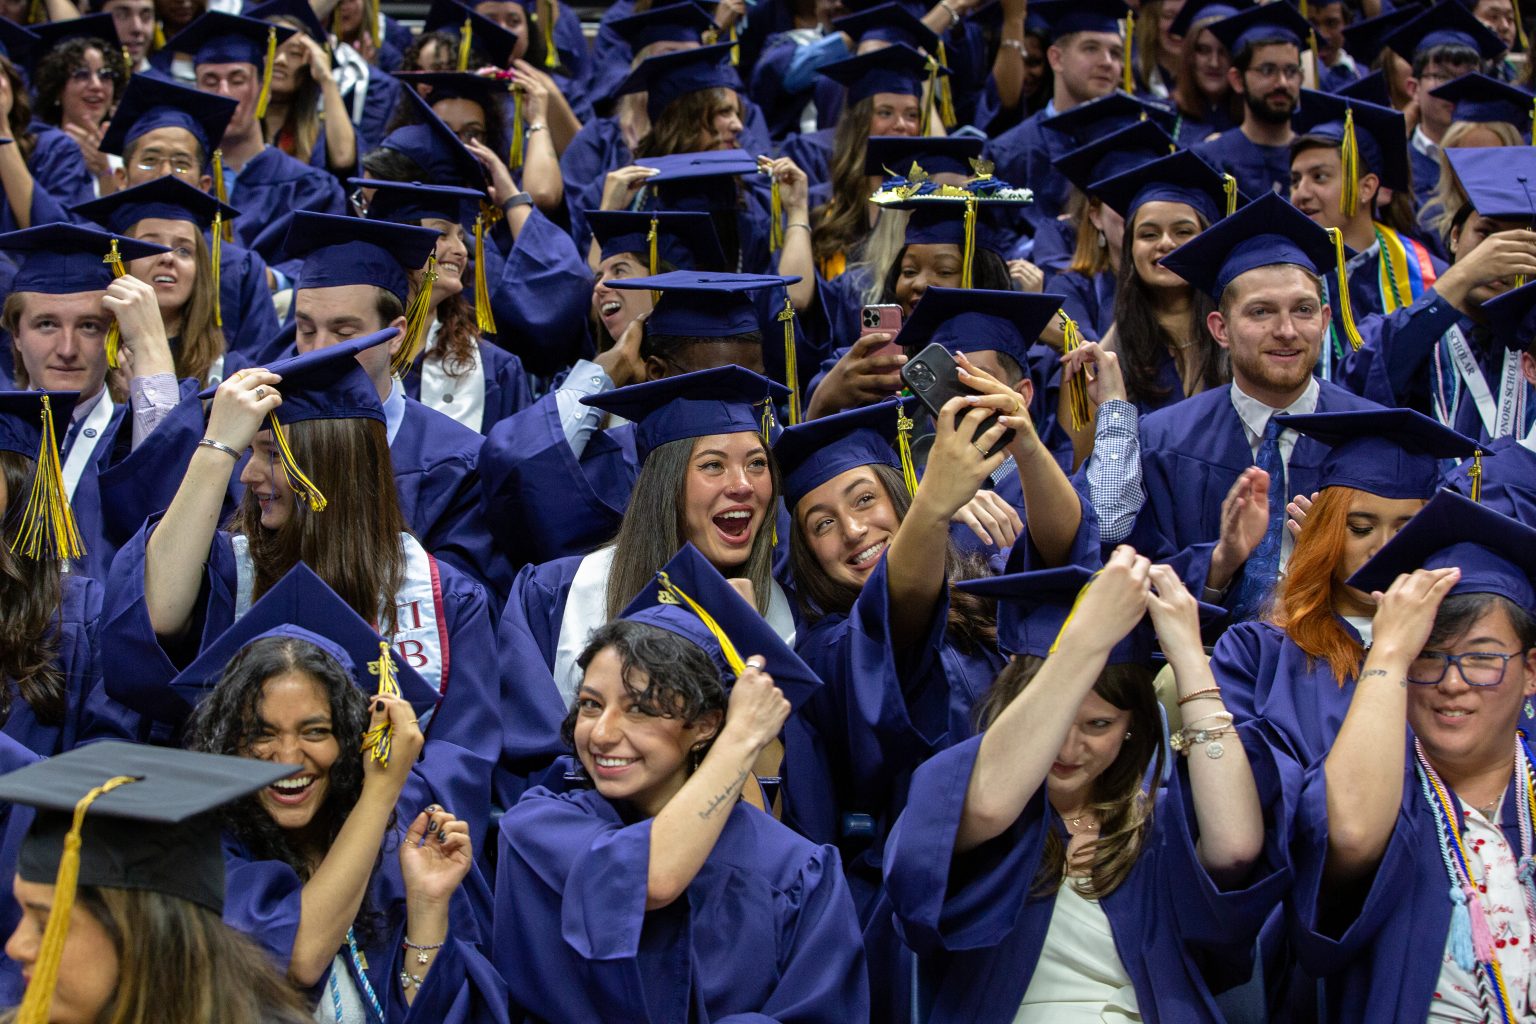 A group of students wearing blue graduation caps and gowns and representing various ethnic backgrounds and genders joyfully move the tassels on their caps at the College of Liberal Arts and Sciences (CLAS) Commencement ceremony. Many smile, some pose for selfies.